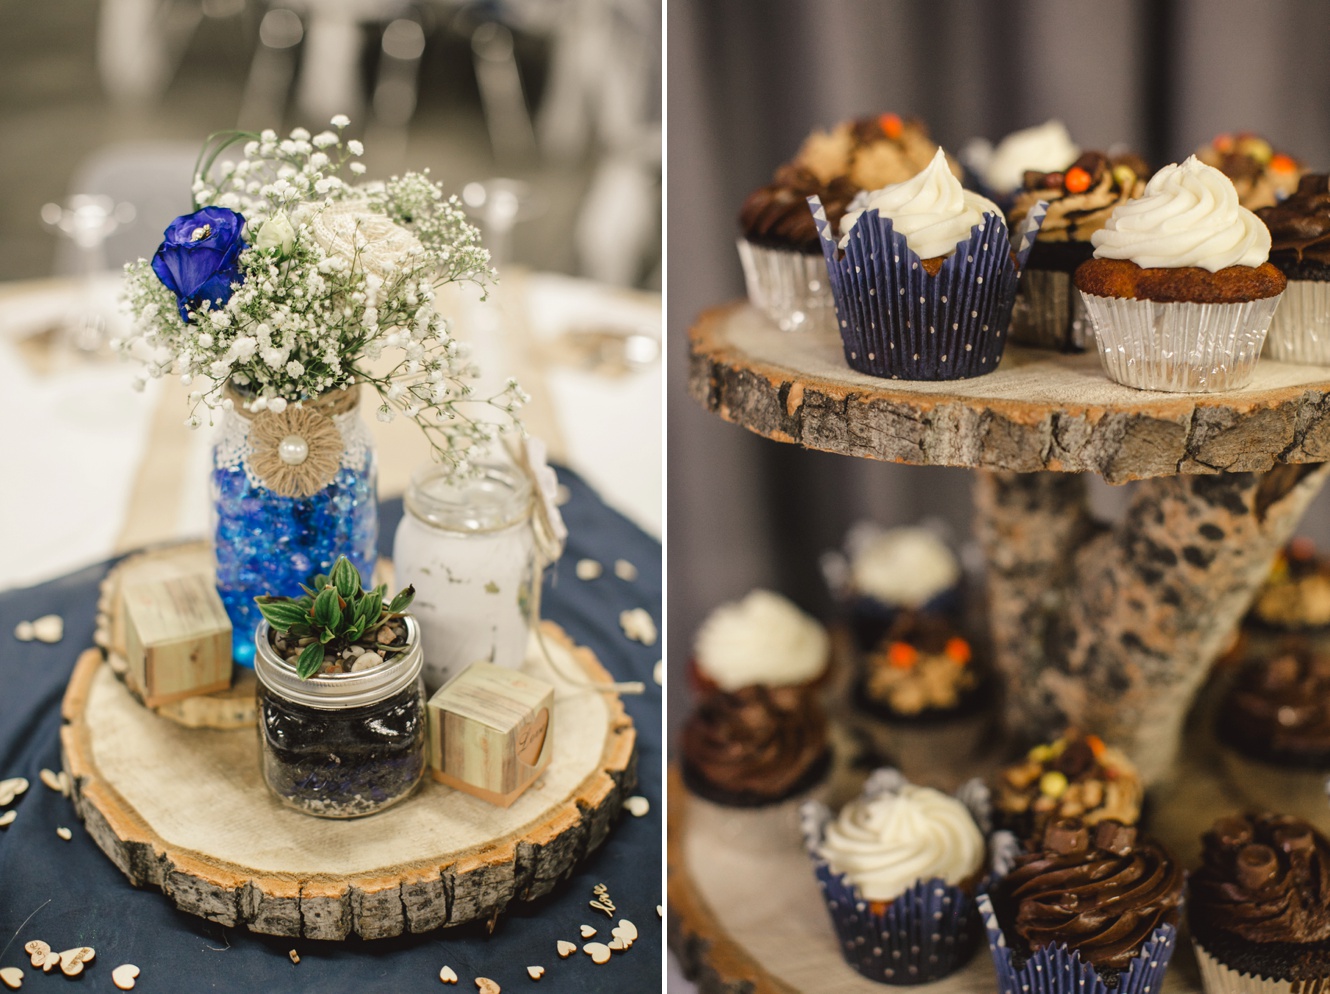 Variety of cupcake flavours at summer wedding photo